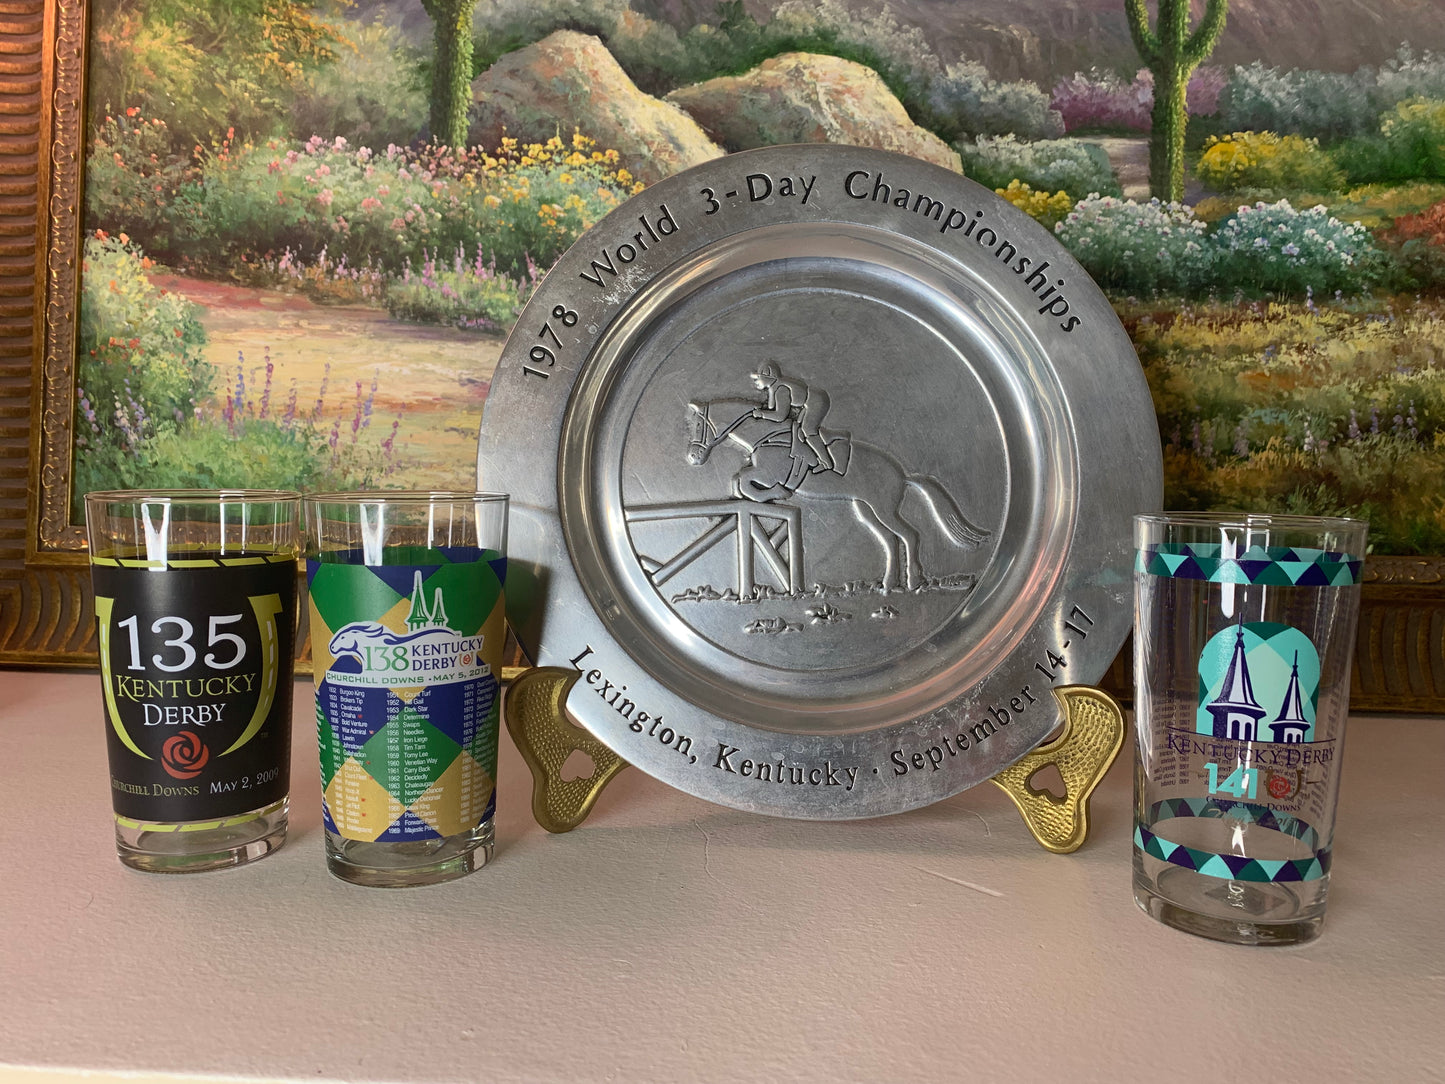 Kentucky Derby glasses set of 3 - Excellent condition!